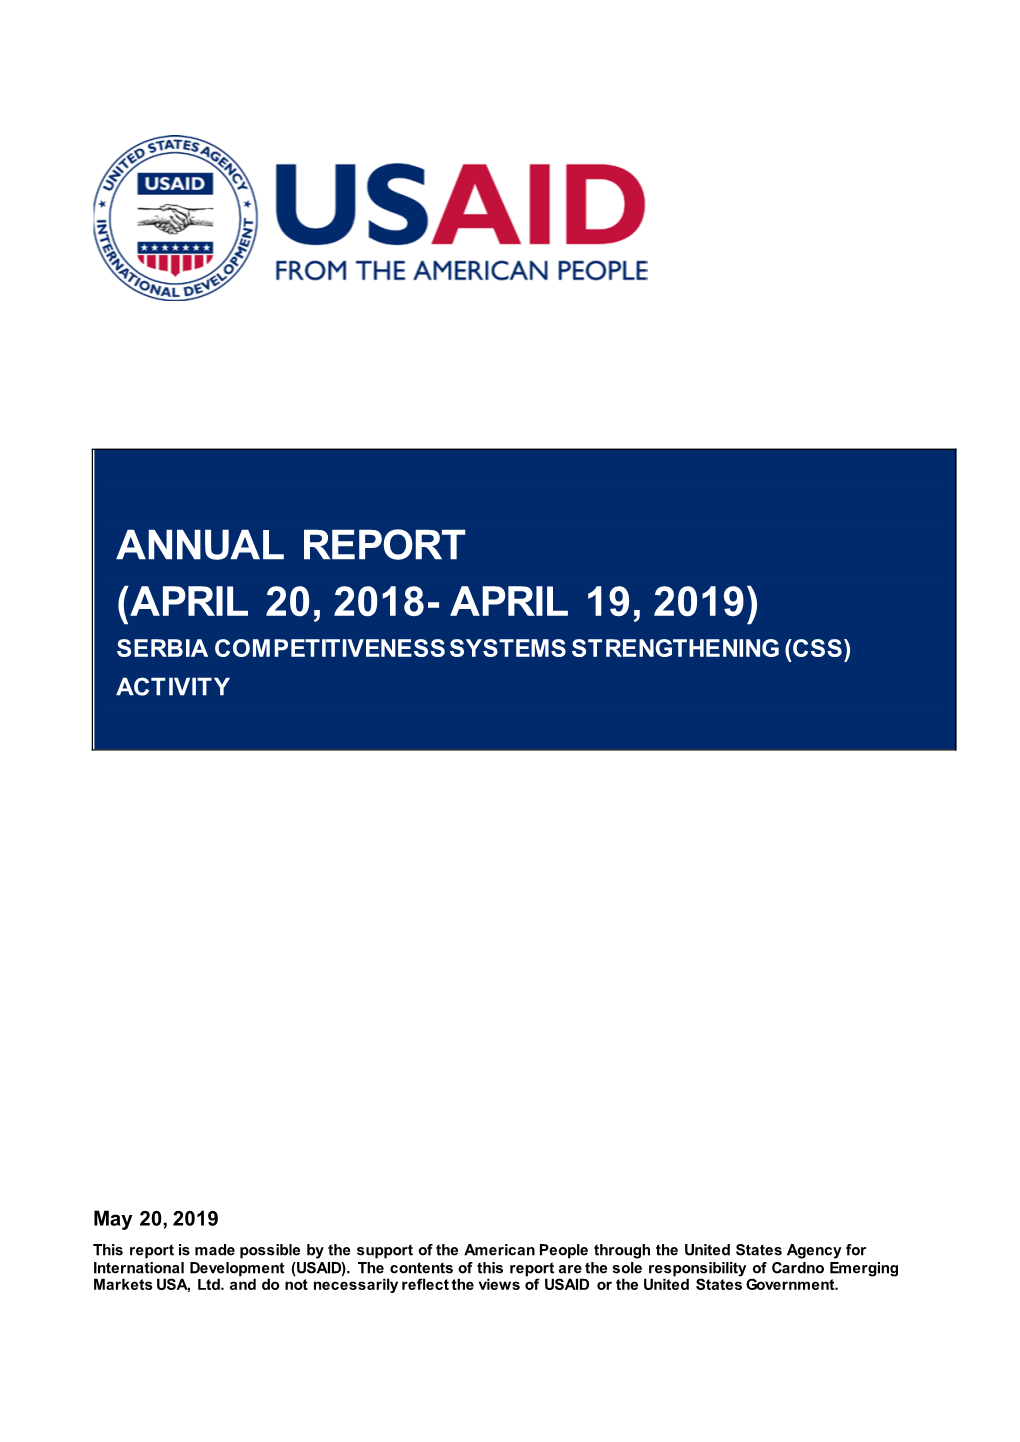 Annual Report (April 20, 2018- April 19, 2019) Serbia Competitiveness Systems Strengthening (Css) Activity